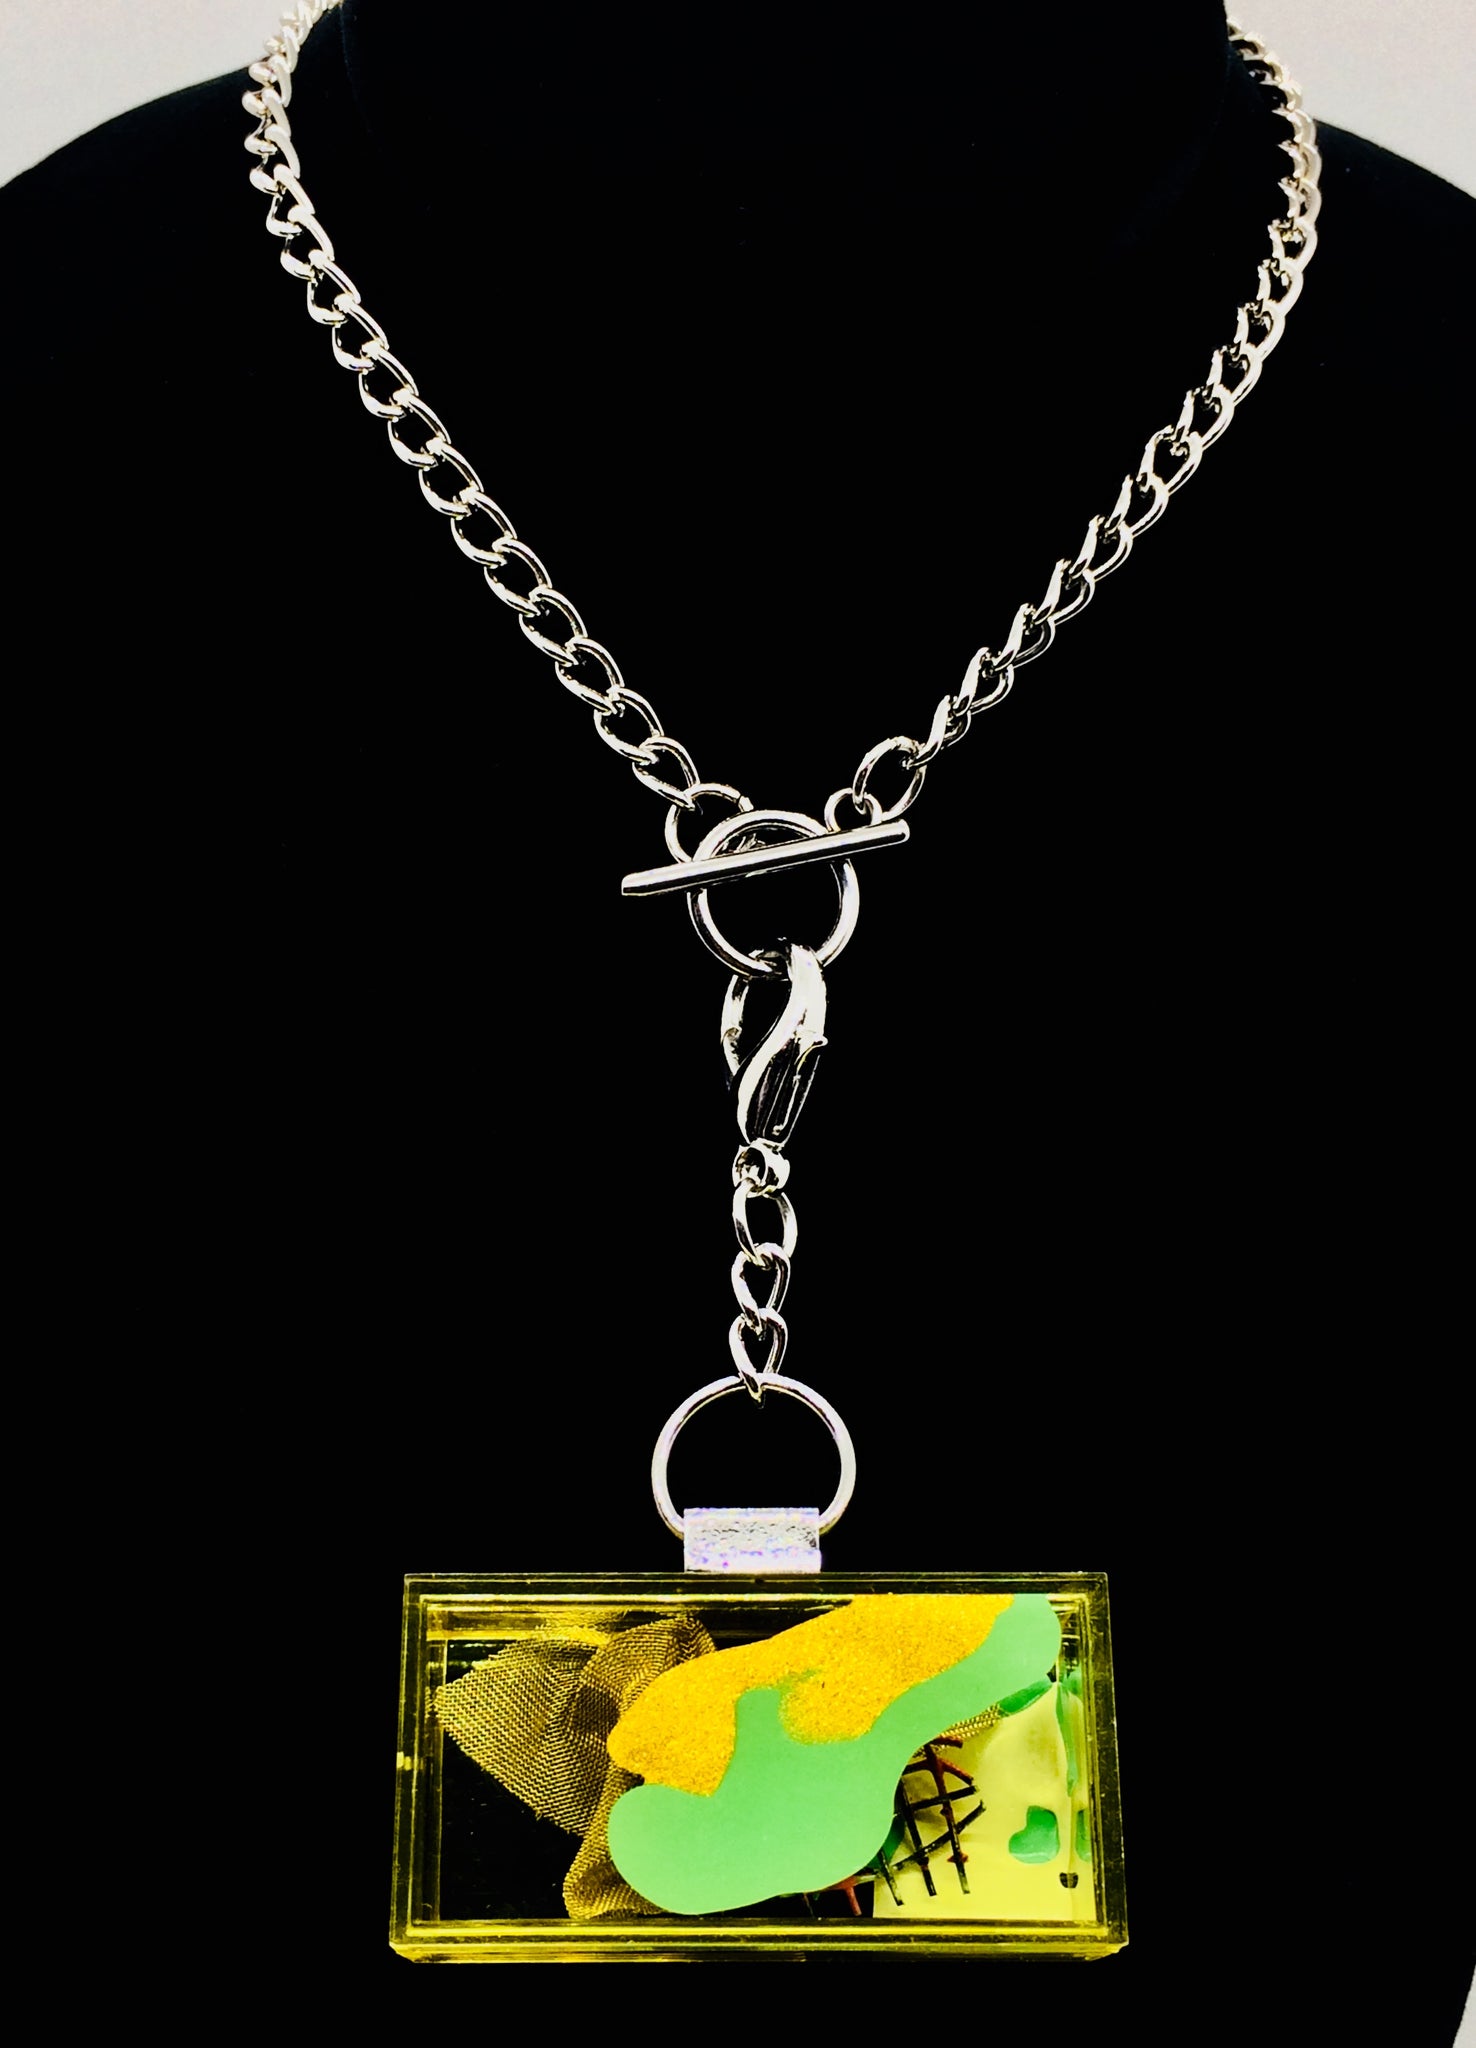 Yellow Node Art Necklace With Chain.01